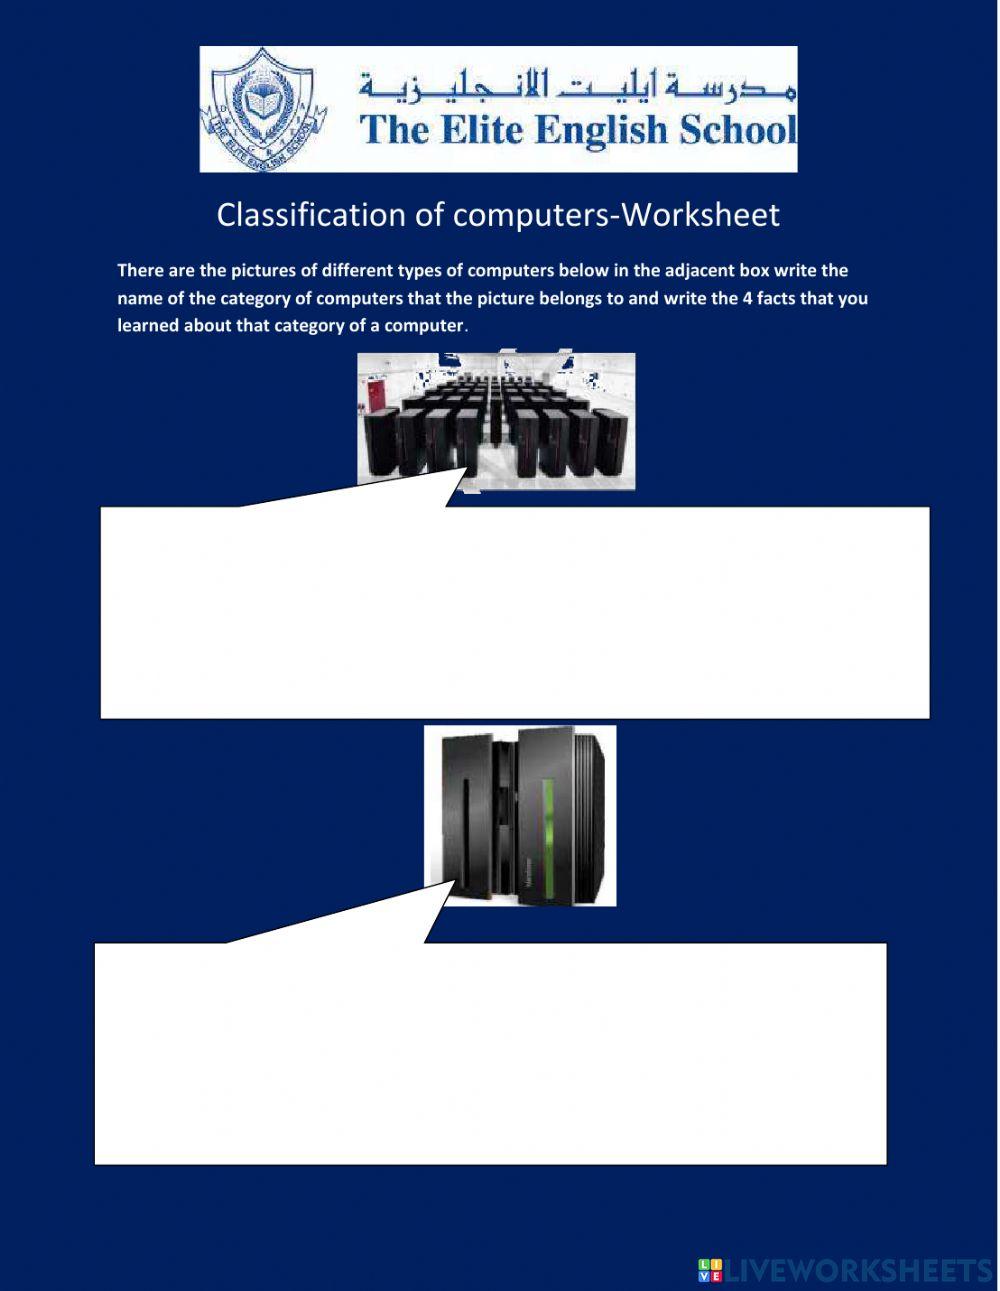 Types of a computer